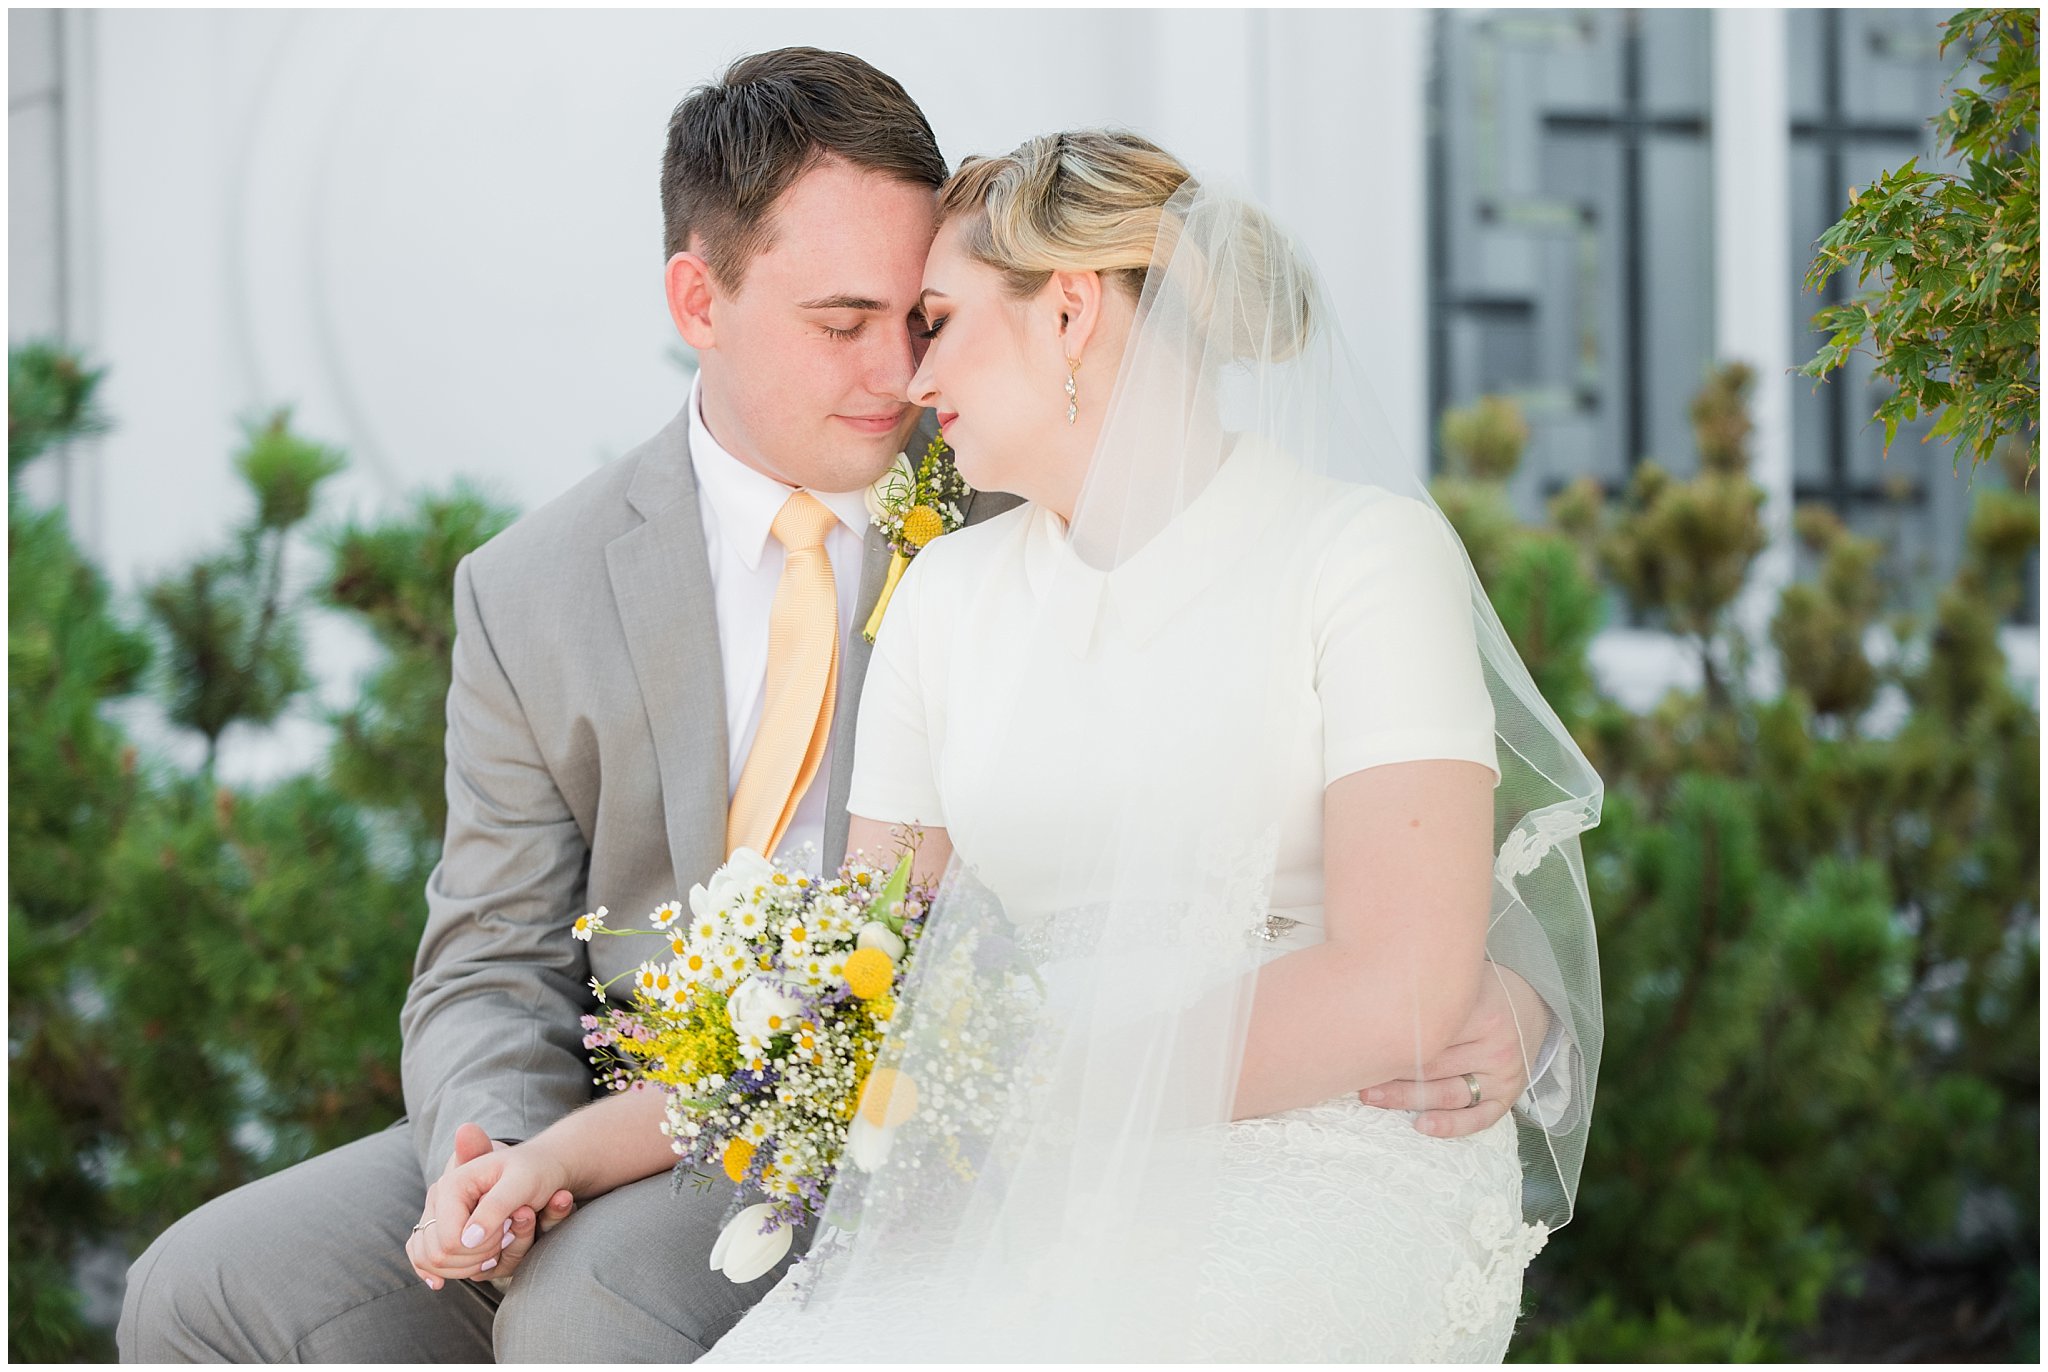 Bride and groom vintage wedding portraits at the Bountiful Temple in the summer with wildflower bouquet | Fountain View Event Venue and Bountiful Temple Wedding | Jessie and Dallin Photography